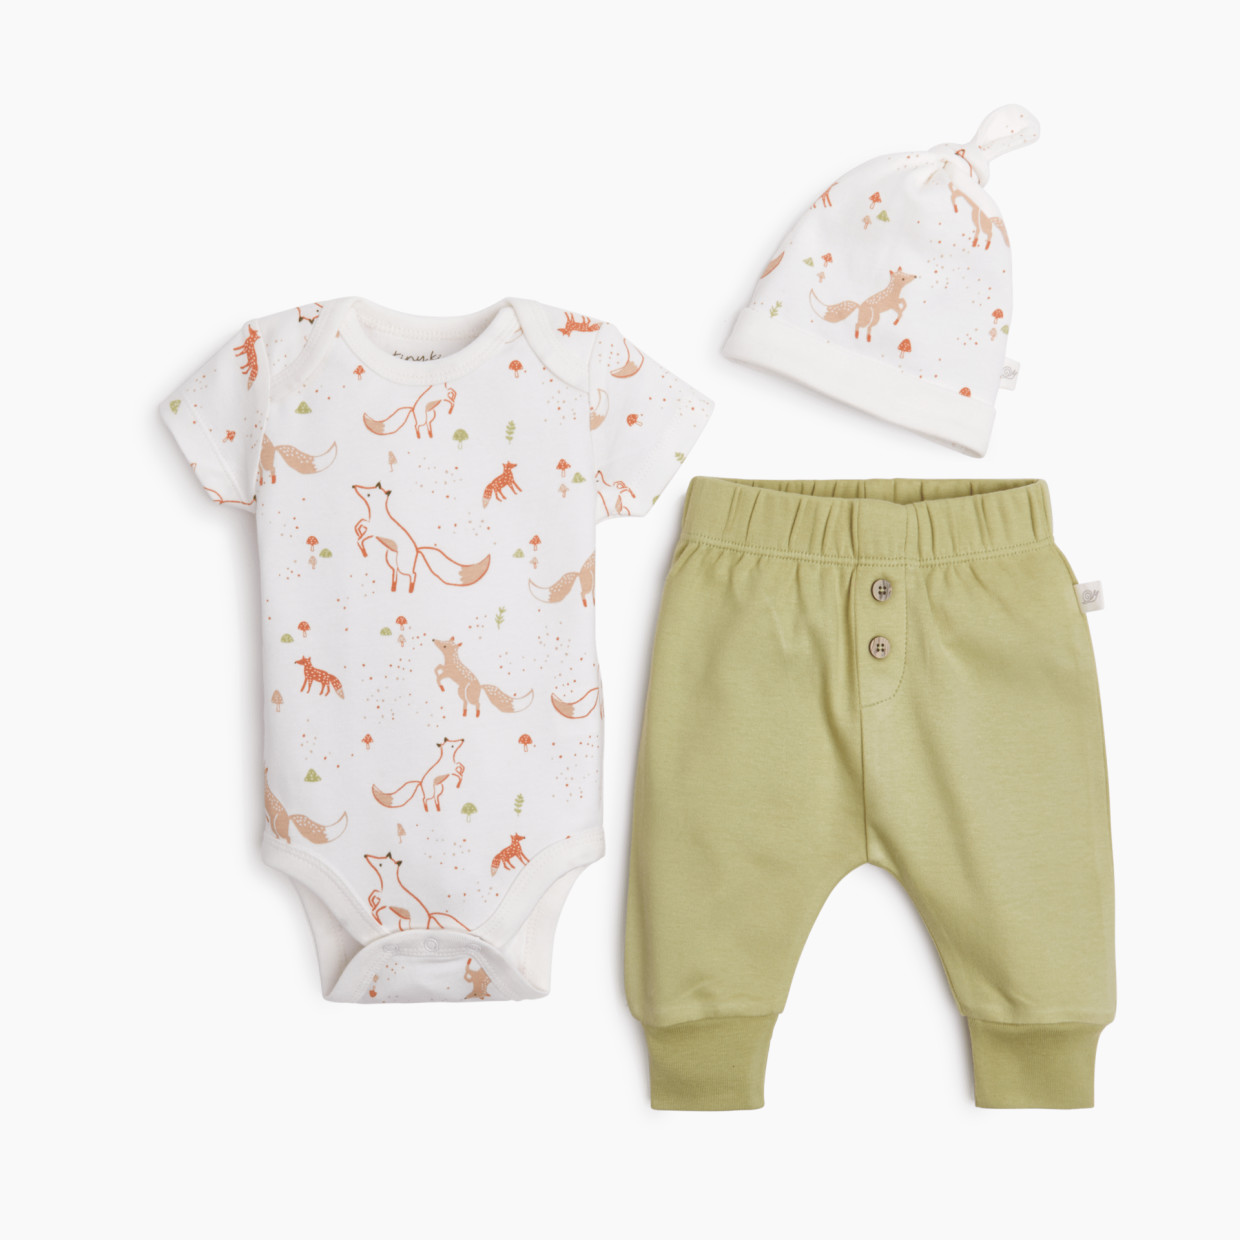 Tiny Kind The Outfit 3 Piece Set - Baby Fox, 6-9 M.